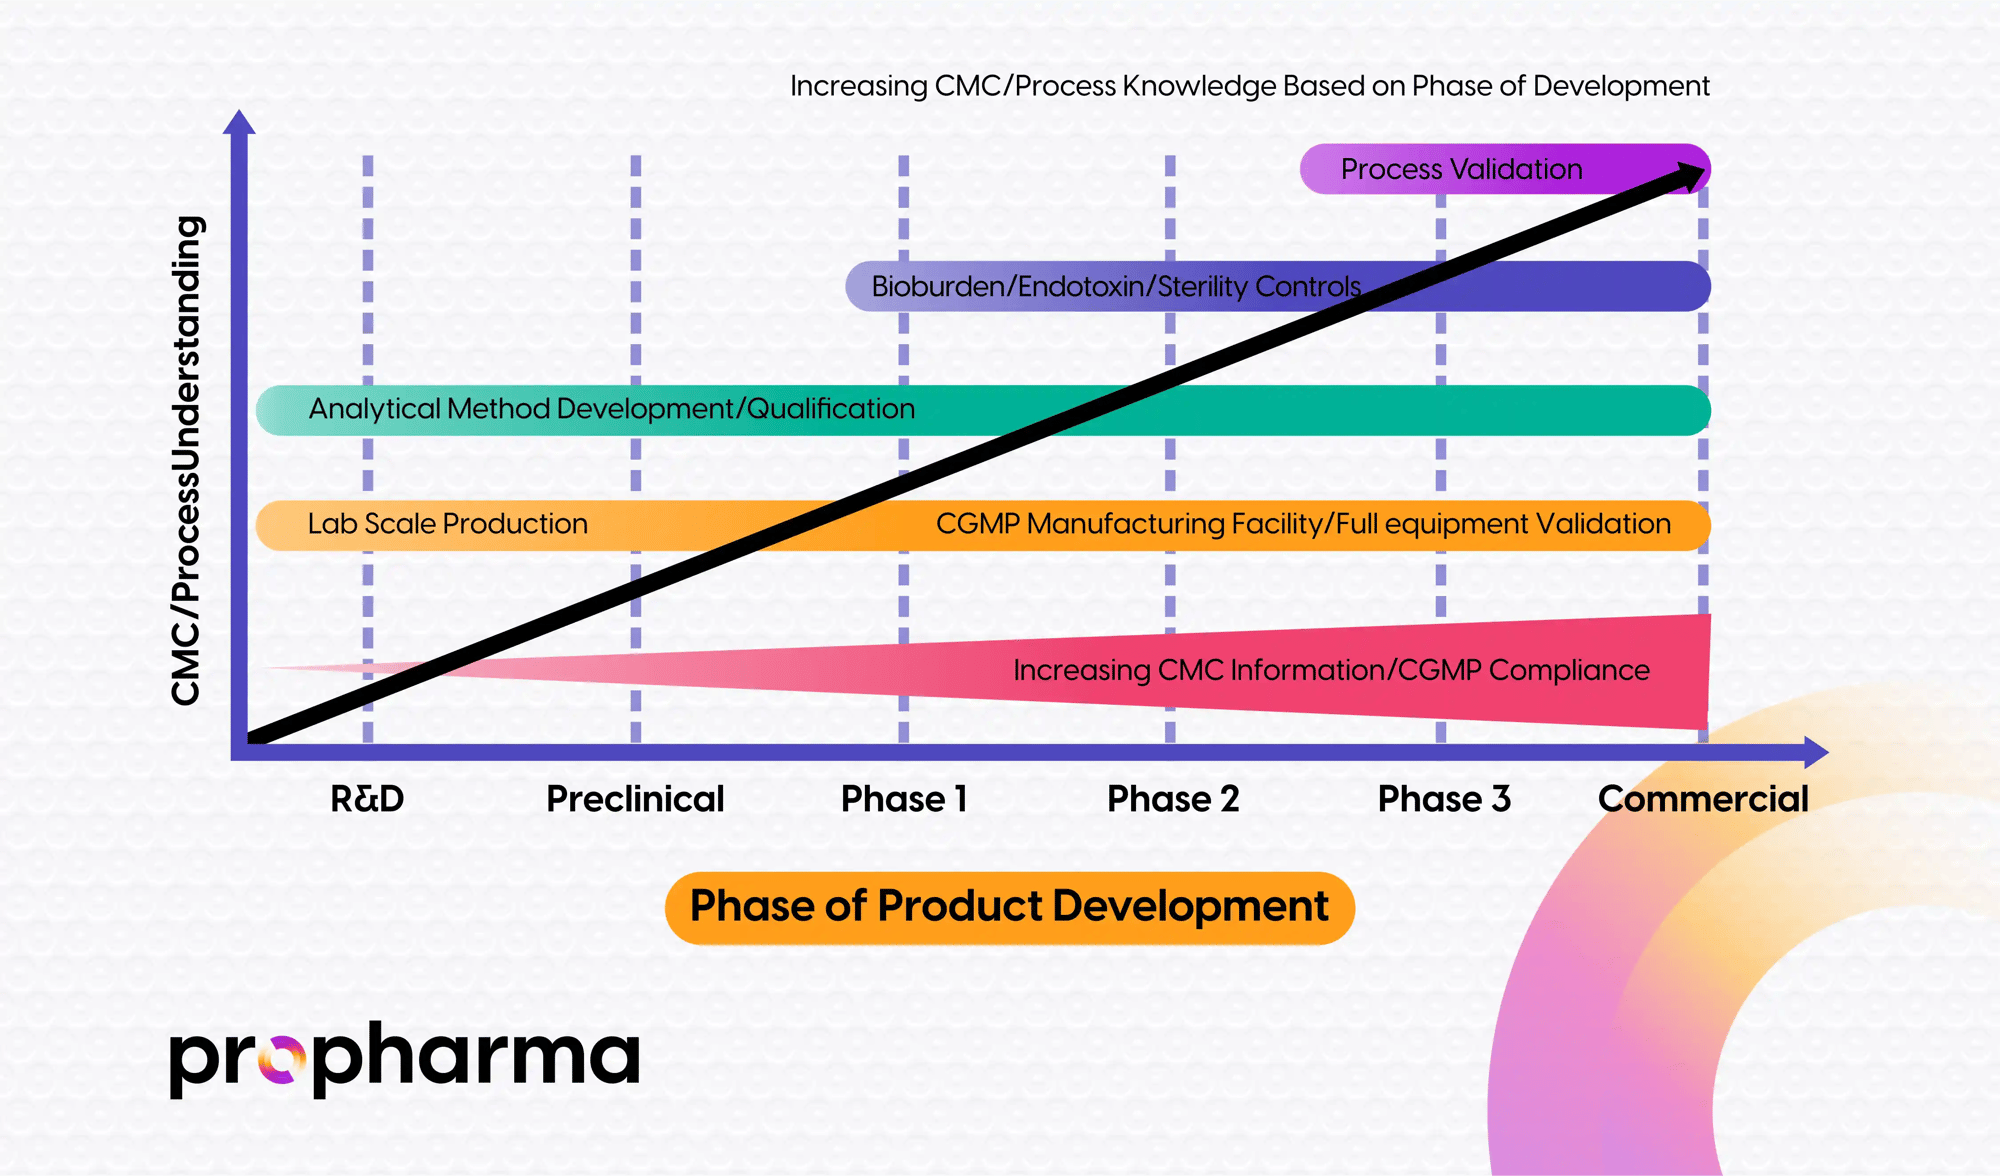 FDA expectations regarding level of CMC product and process activities, increasing as product advances through drug development.